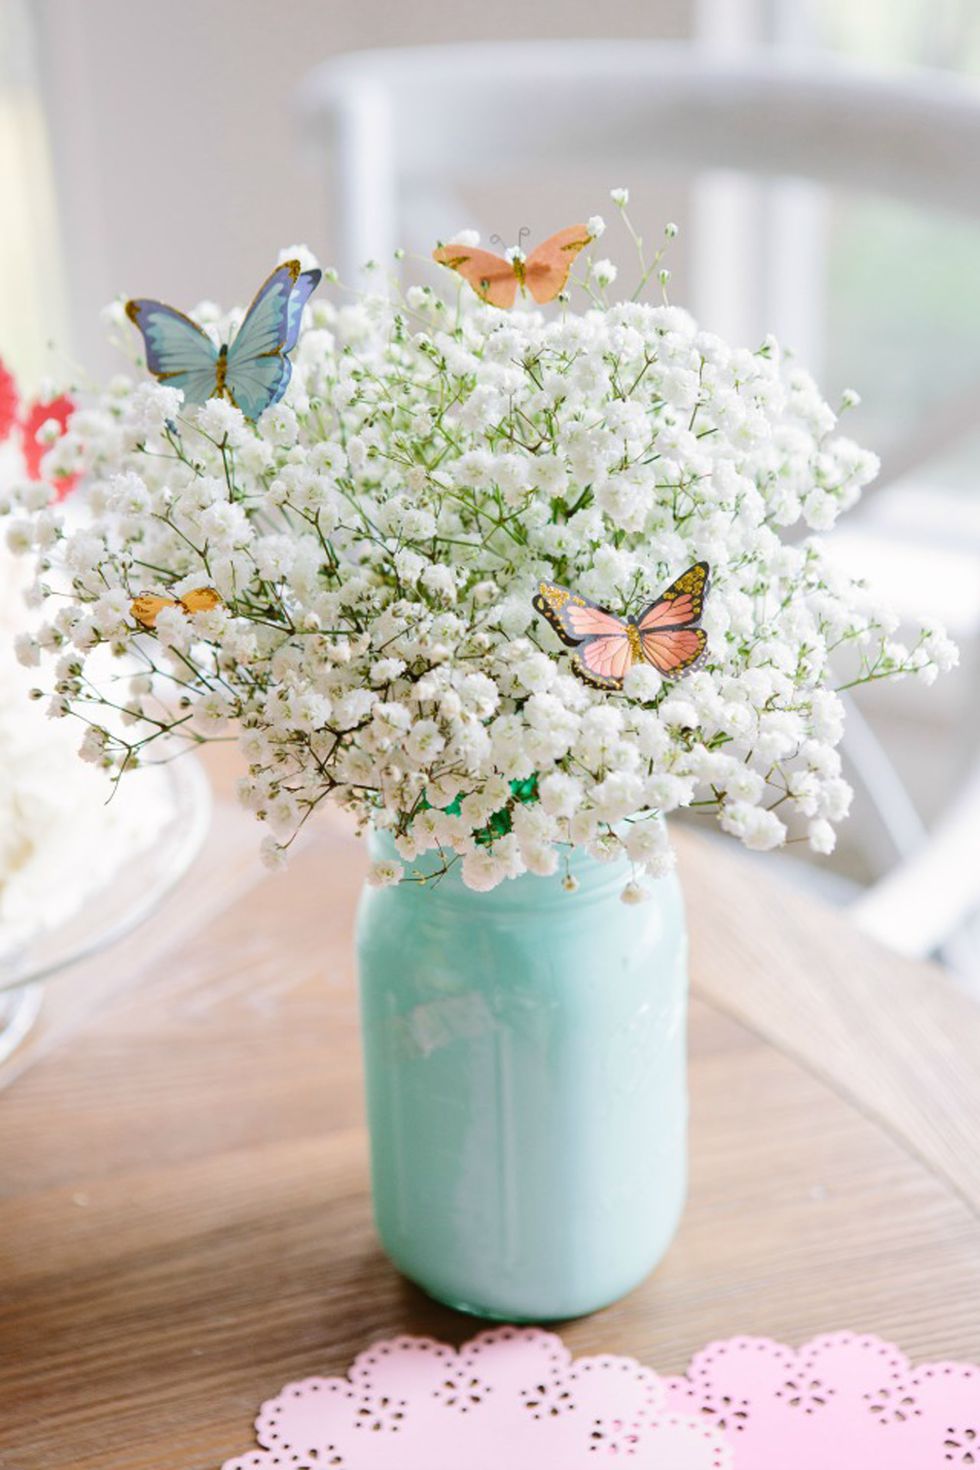 10 Amazing DIY Floral Decor Ideas To Refresh Your Home